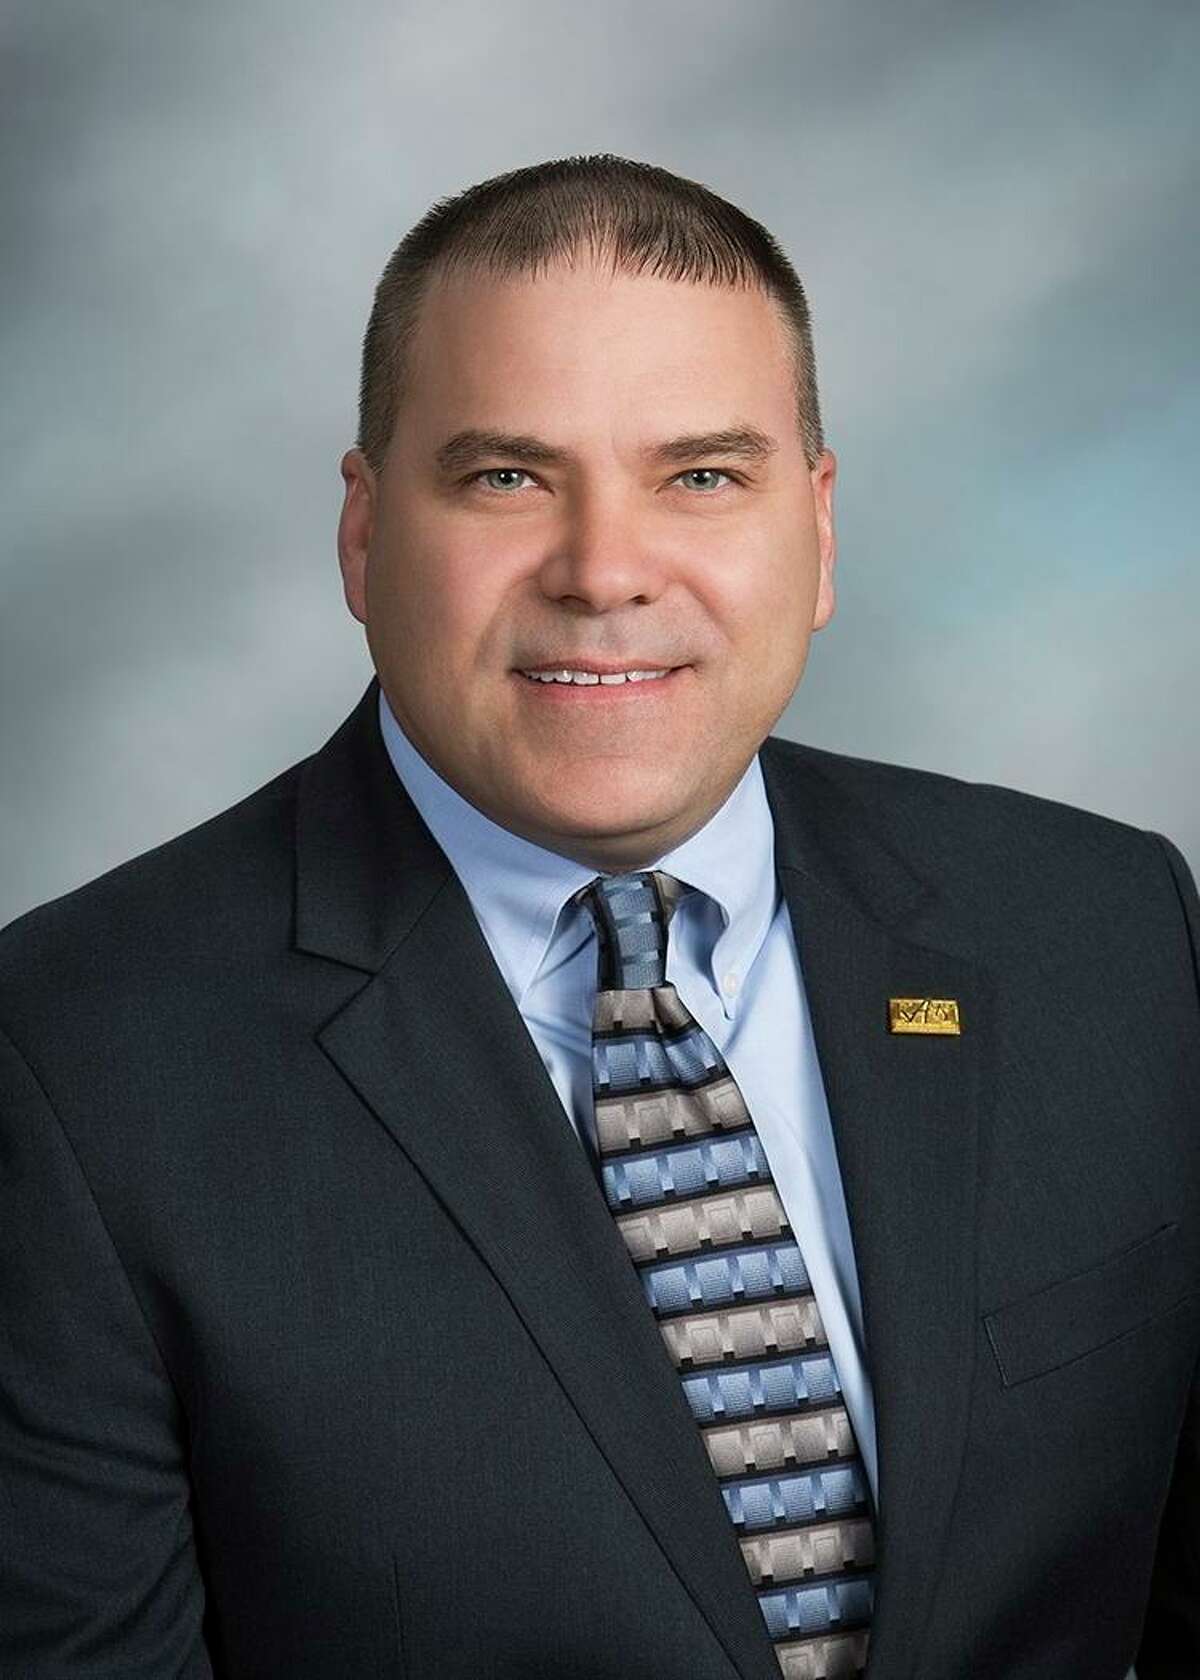 Katy Independent School District Superintendent Ken Gregorski is slated to offer his State of the District address on Friday, Oct. 23. The annual event will be held virtually.